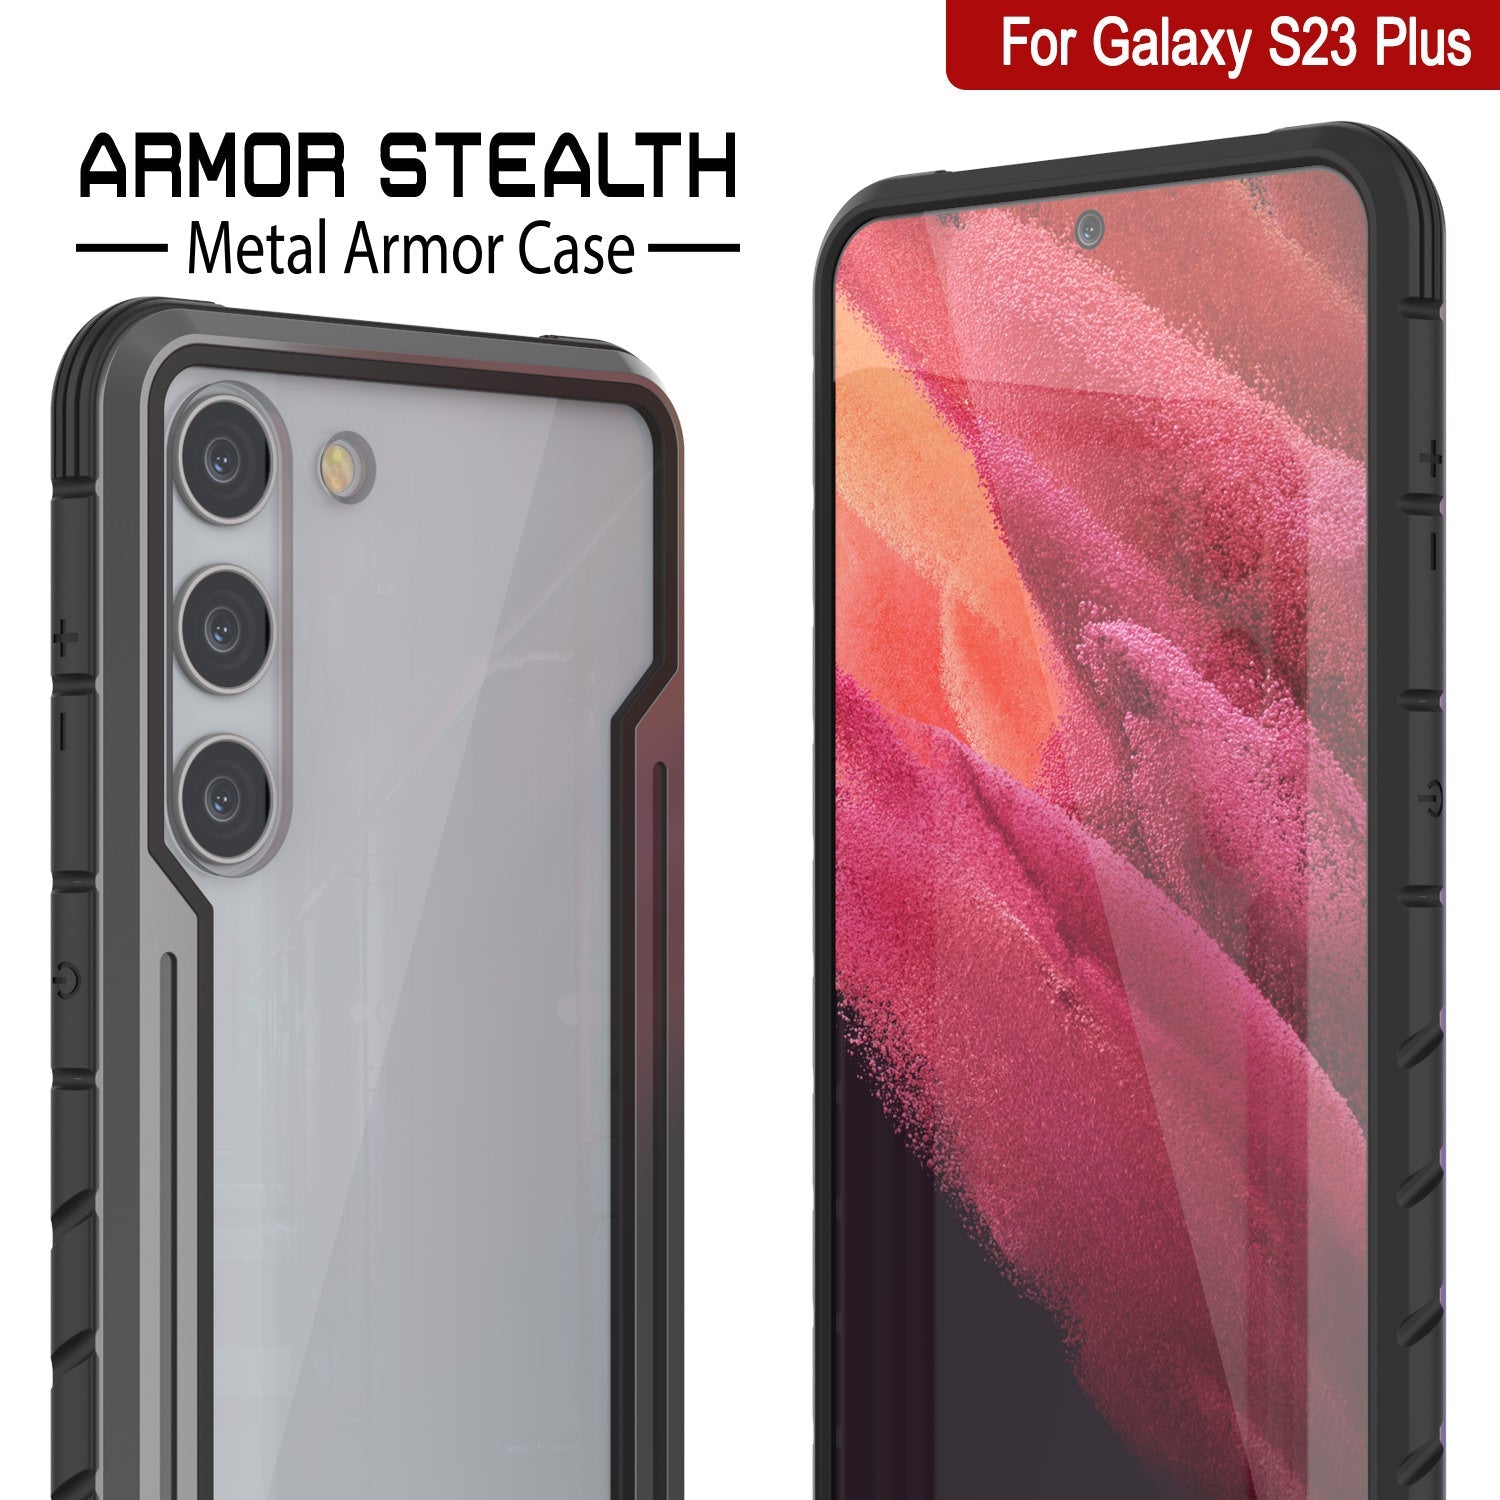 Punkcase S23+ Plus Armor Stealth Case Protective Military Grade Multilayer Cover [Grey-Black]